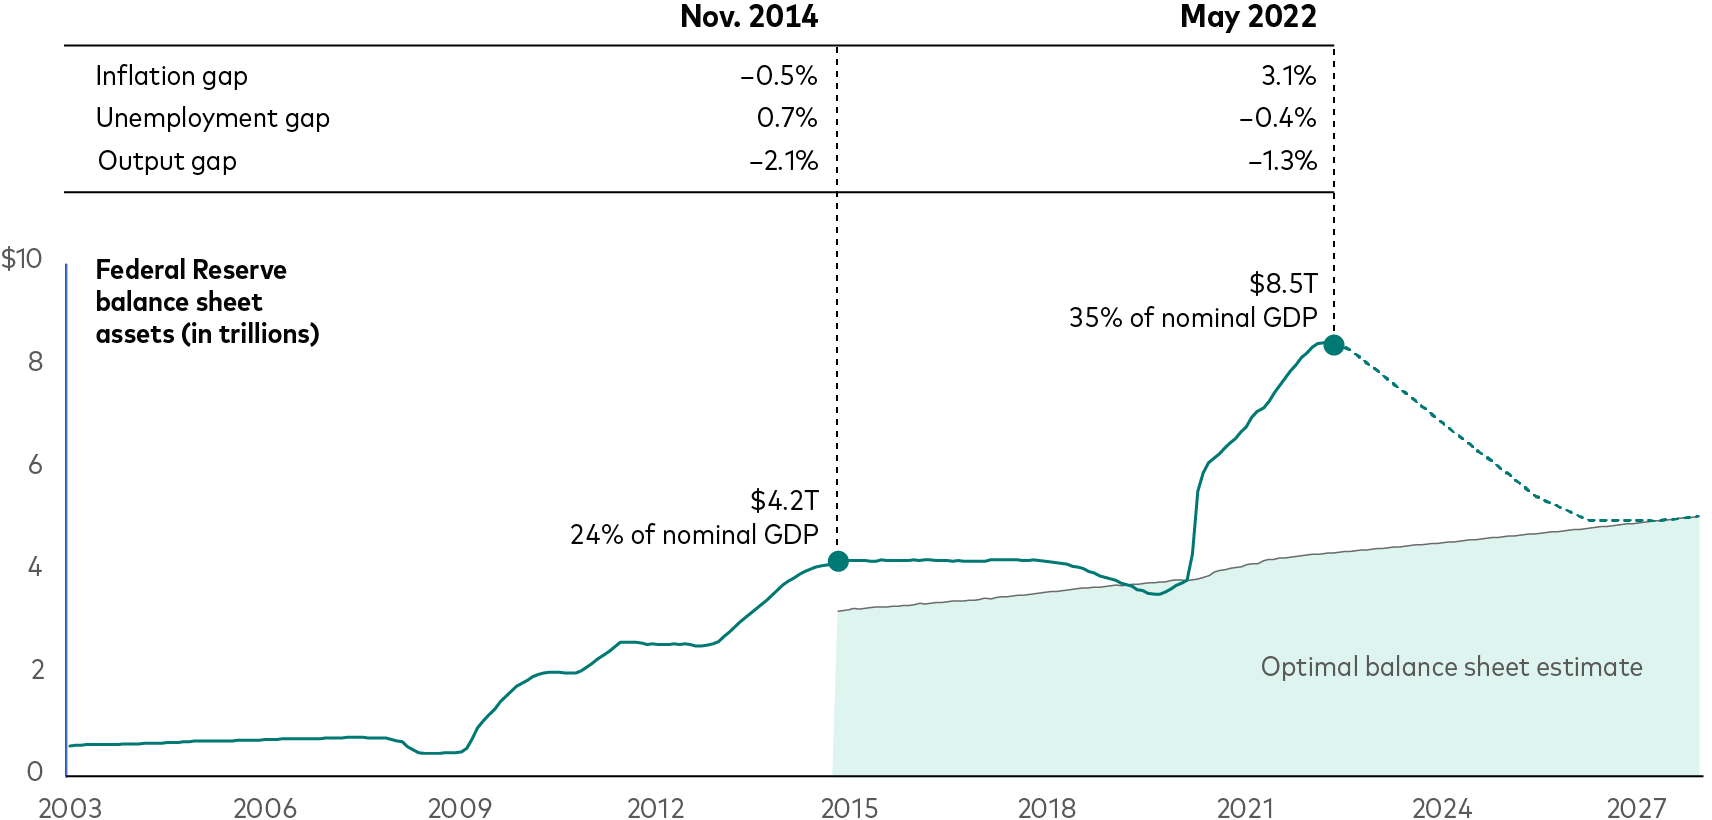 Annotations on a line chart showing the Fed’s balance sheet indicate that its holdings expanded to $4.2 trillion, or 24% of nominal GDP, in November 2014. Annotations also indicate that the Fed’s holdings expanded to $8.5 trillion, or 35% of nominal GDP, in early 2022. Vanguard projections show the Fed reducing holdings over the coming years. A shaded area shows Vanguard’s projection of the optimal balance sheet size rising from 2015 beyond 2027. A table within the chart shows the inflation gap at negative 0.5%, the unemployment gap at 0.7%, and the output gap at negative 2.1% in November 2014. For May 2022, the table shows the inflation gap at 3.1%, the unemployment gap at negative 0.4%, and the output gap at negative 1.3%.